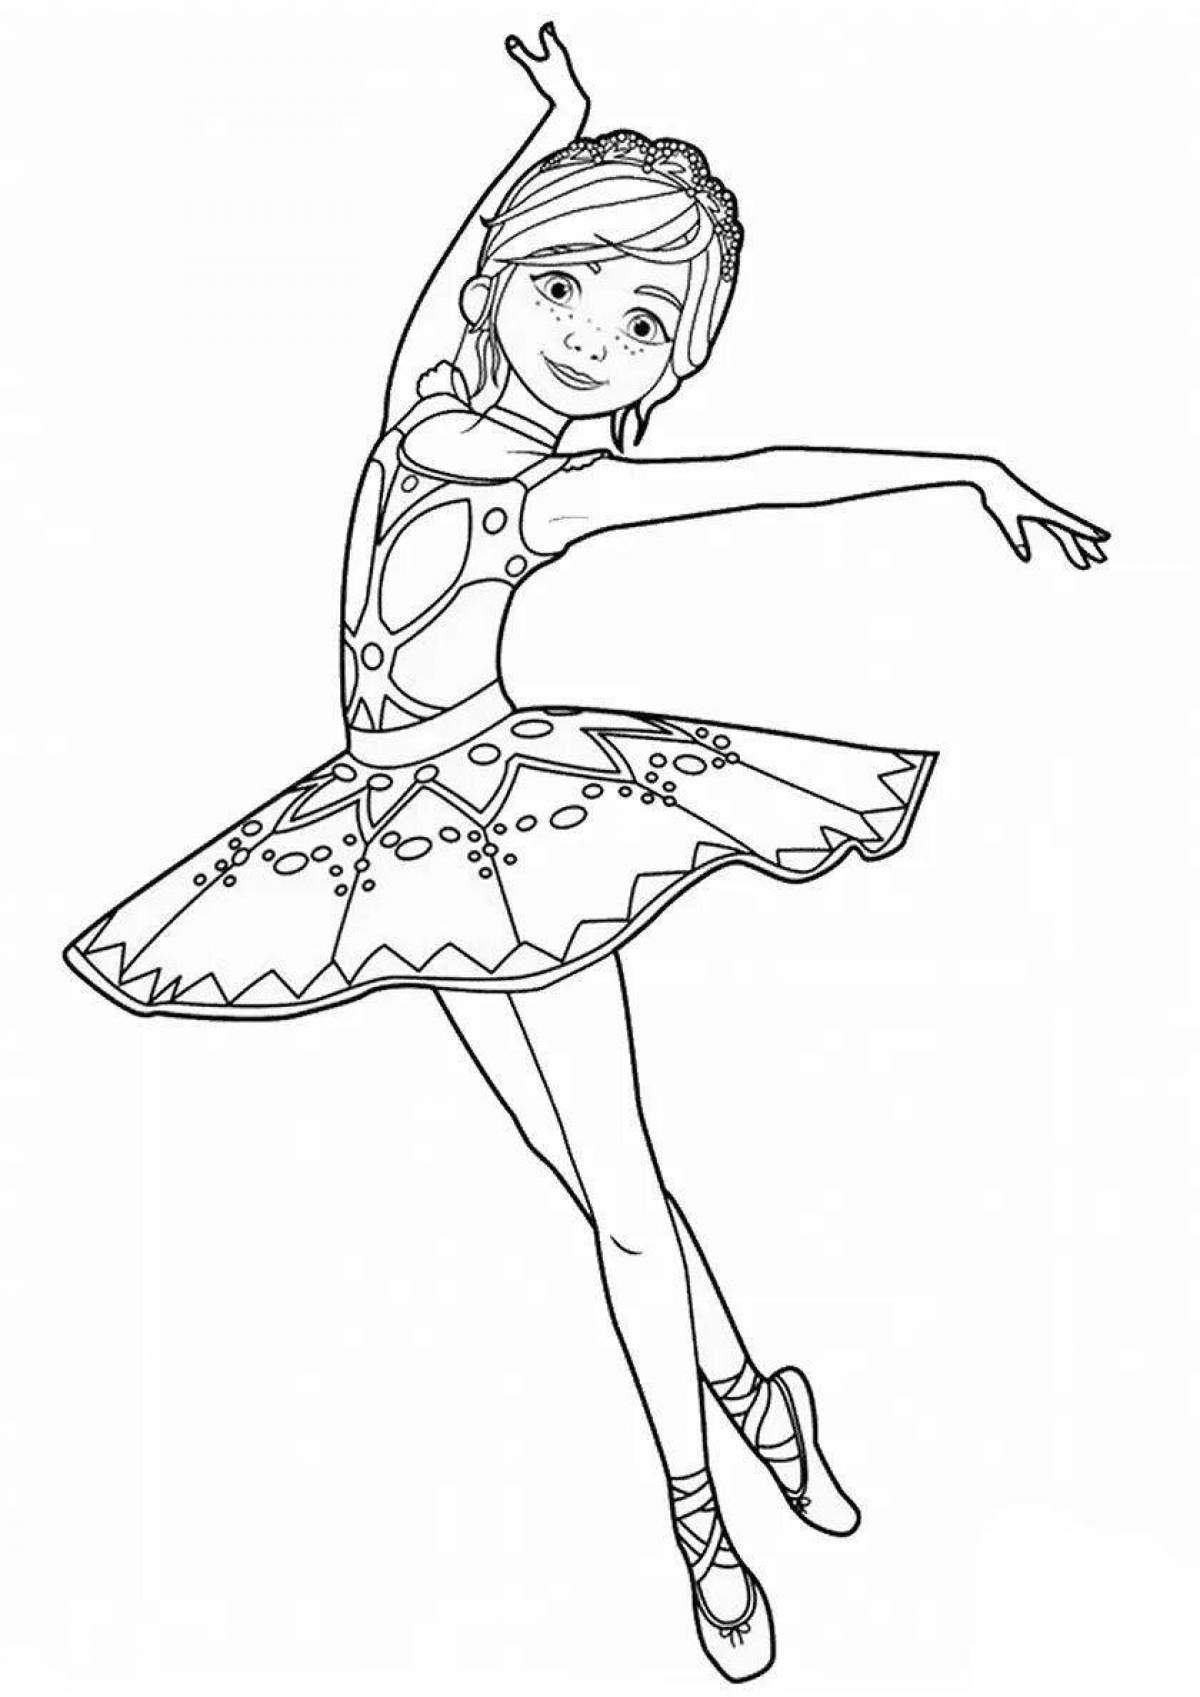 Coloring page playful dancer